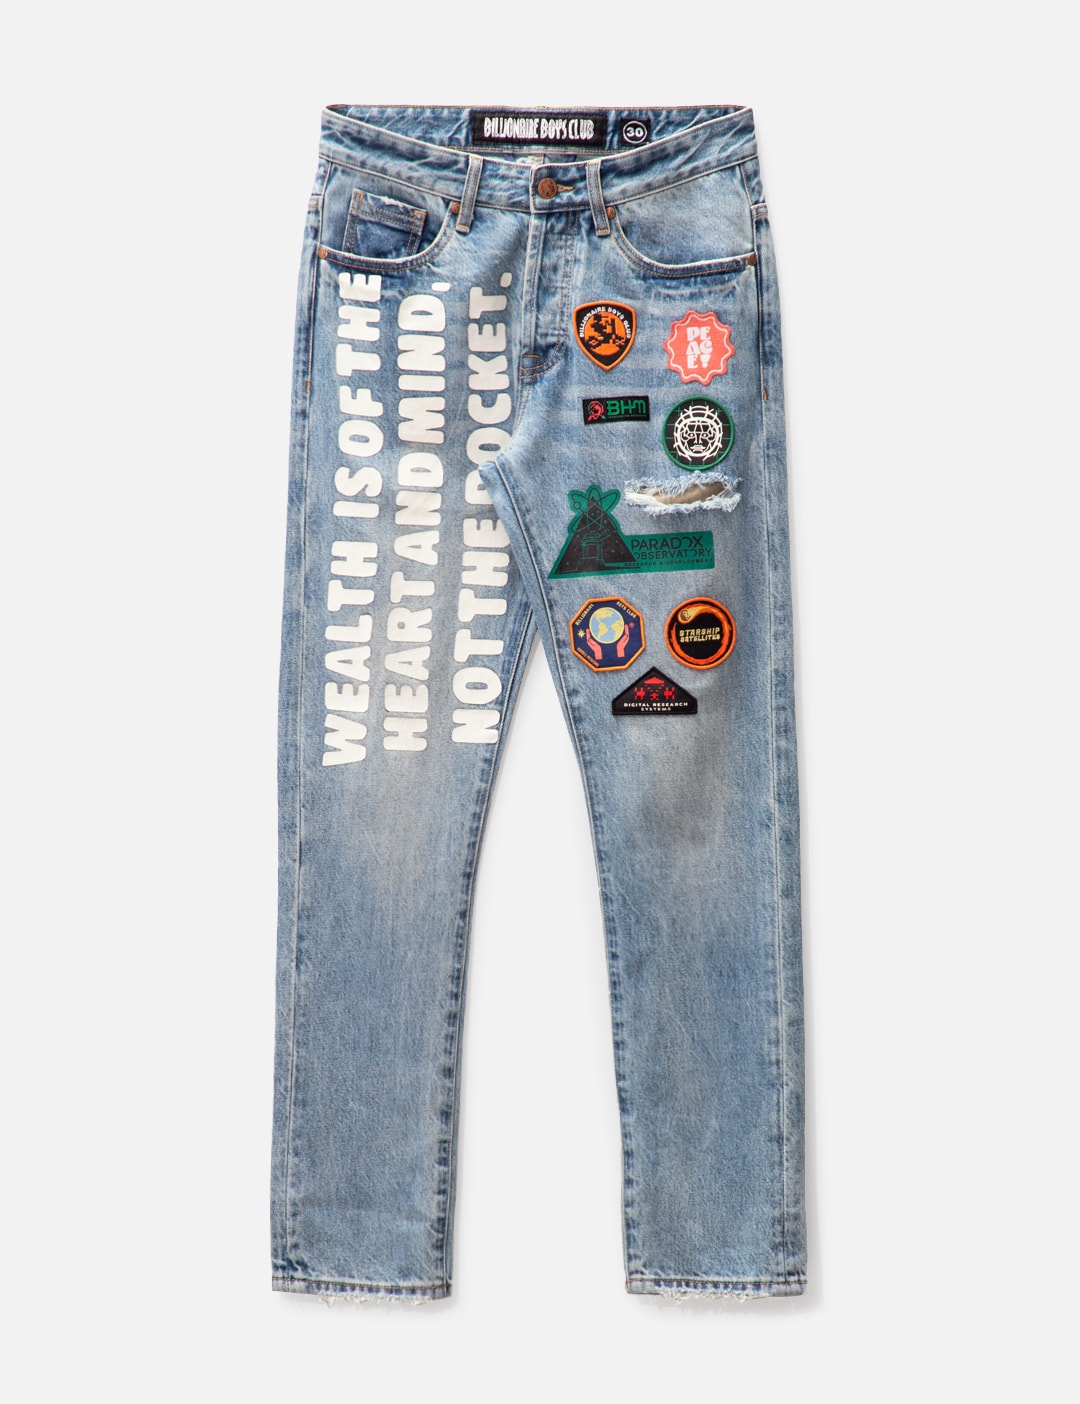 Billionaire Boys Club - BB Paradox Jeans HBX - Curated Fashion and by Hypebeast